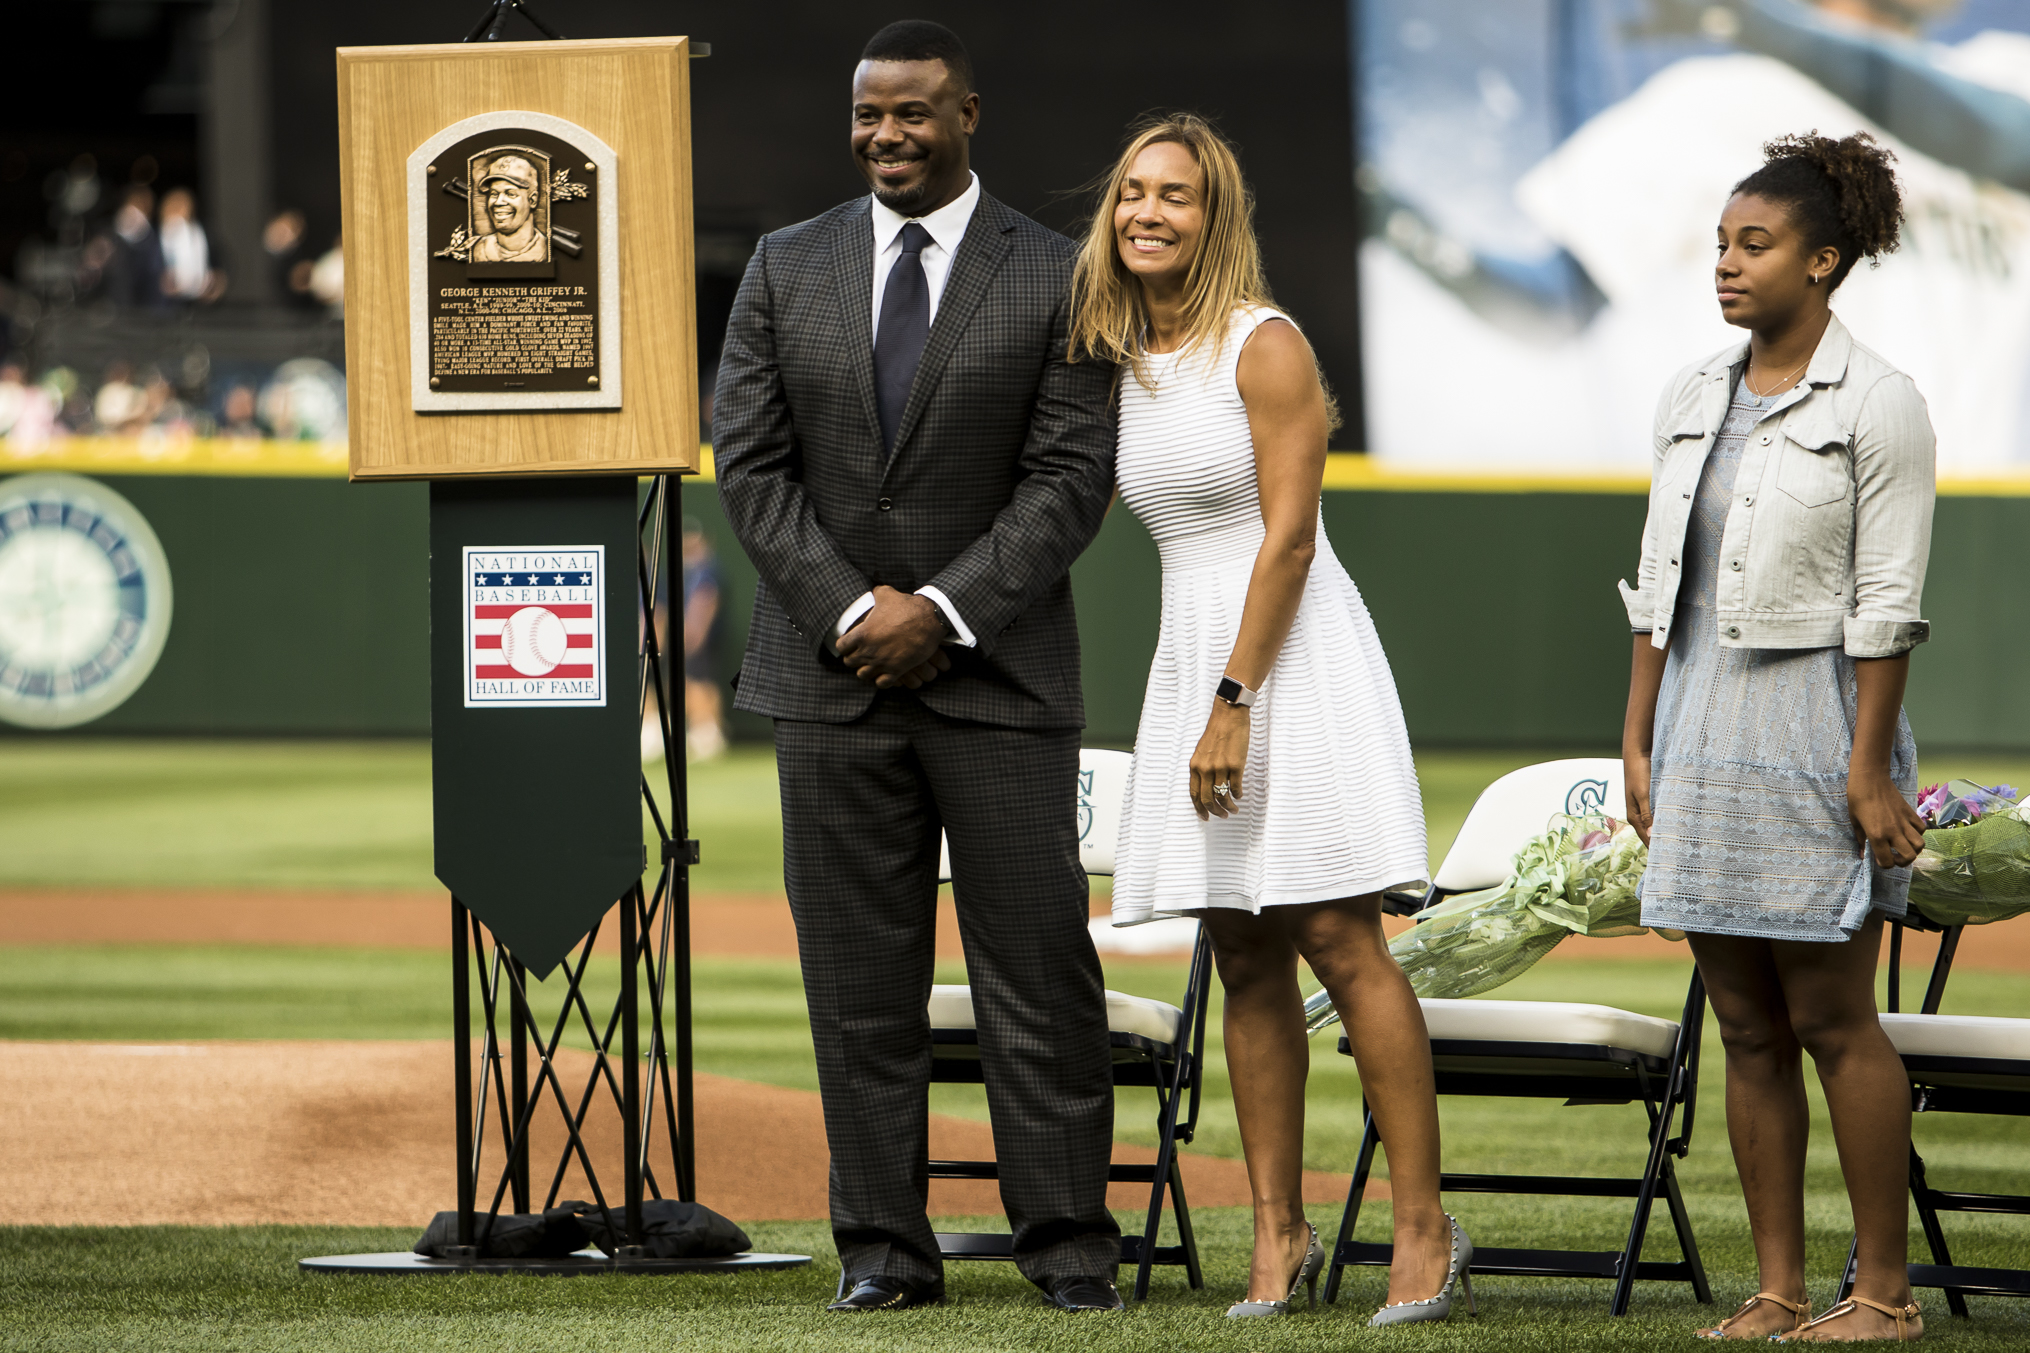 On This Date: Mariners Retire Ken Griffey Jr.'s Number 24